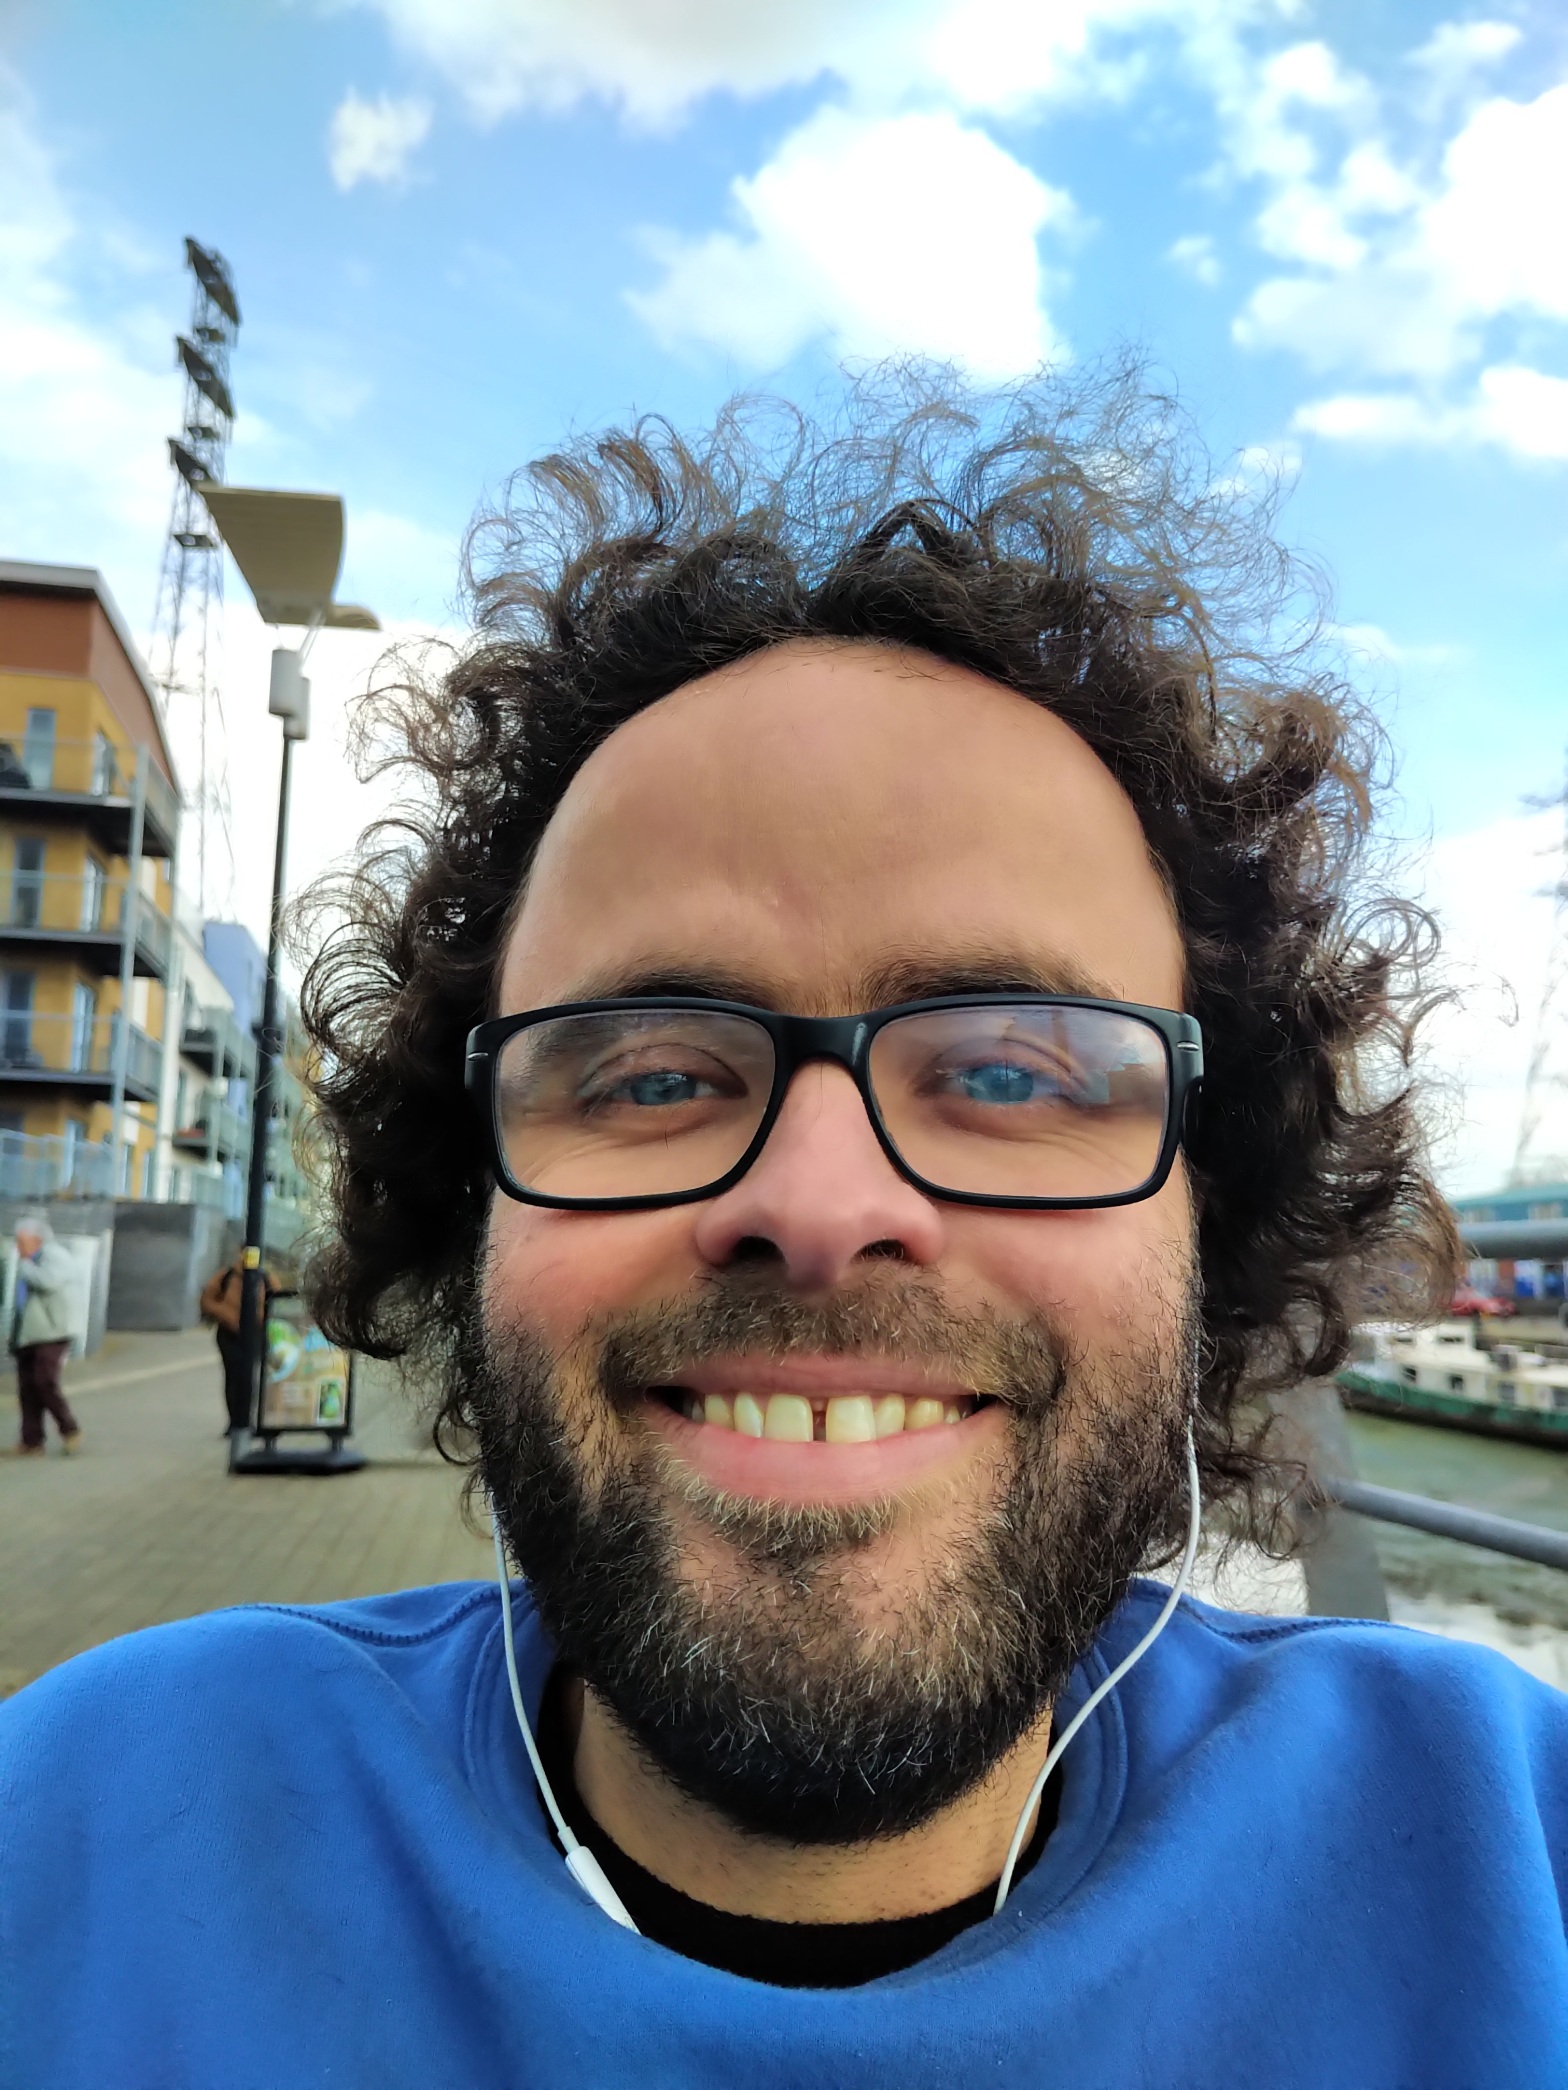 Peter smiles, a white man with dark curly hair frazzling skywards, beard with specks of grey, black glasses. He’s wearing a dark blue jumper and the sky is a light blue with a touch of cloud behind him”.